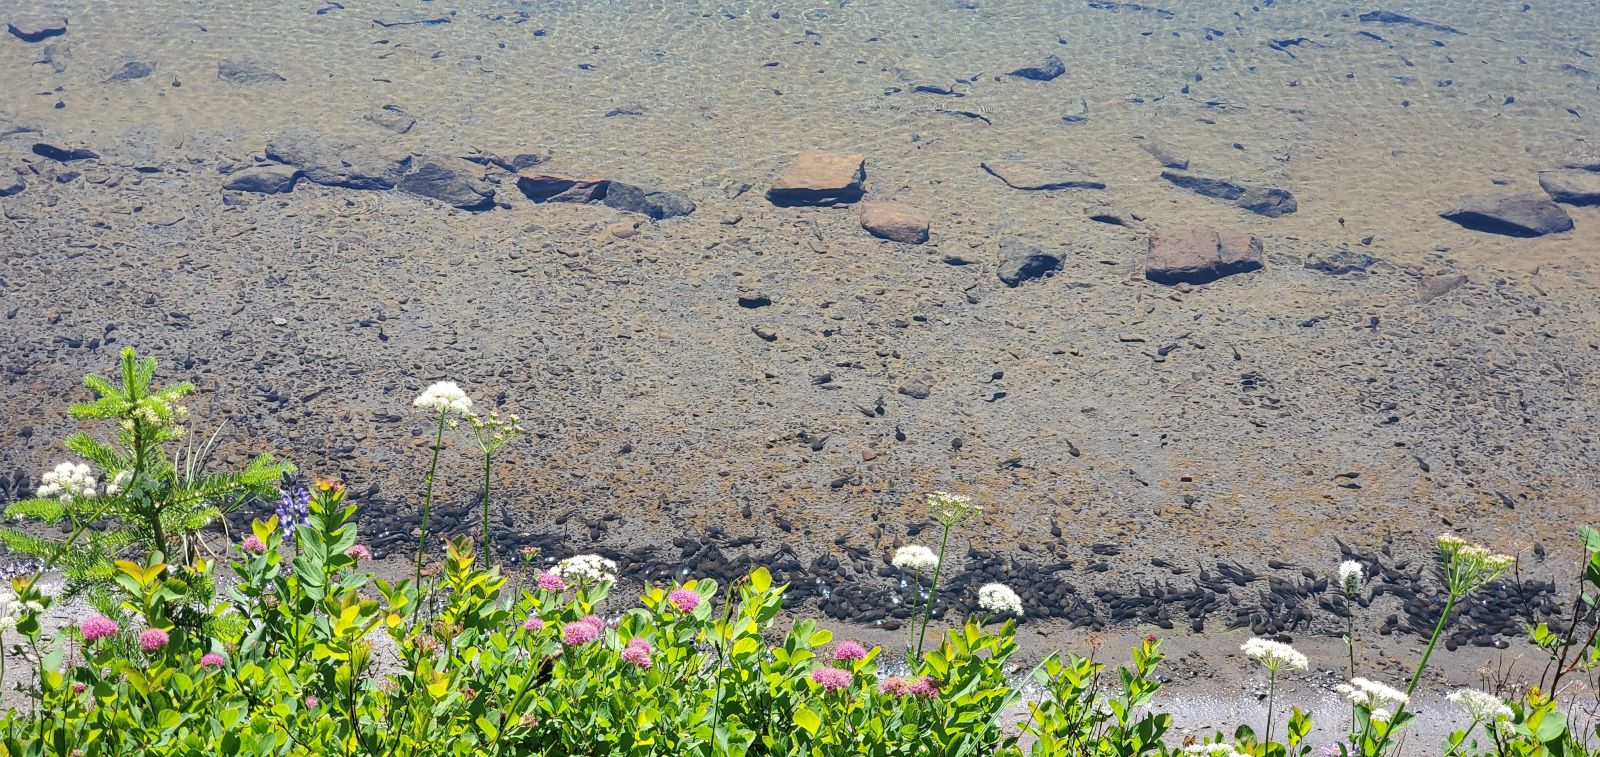 Zoom in! You’re looking at hundreds of tadpoles along the water’s edge